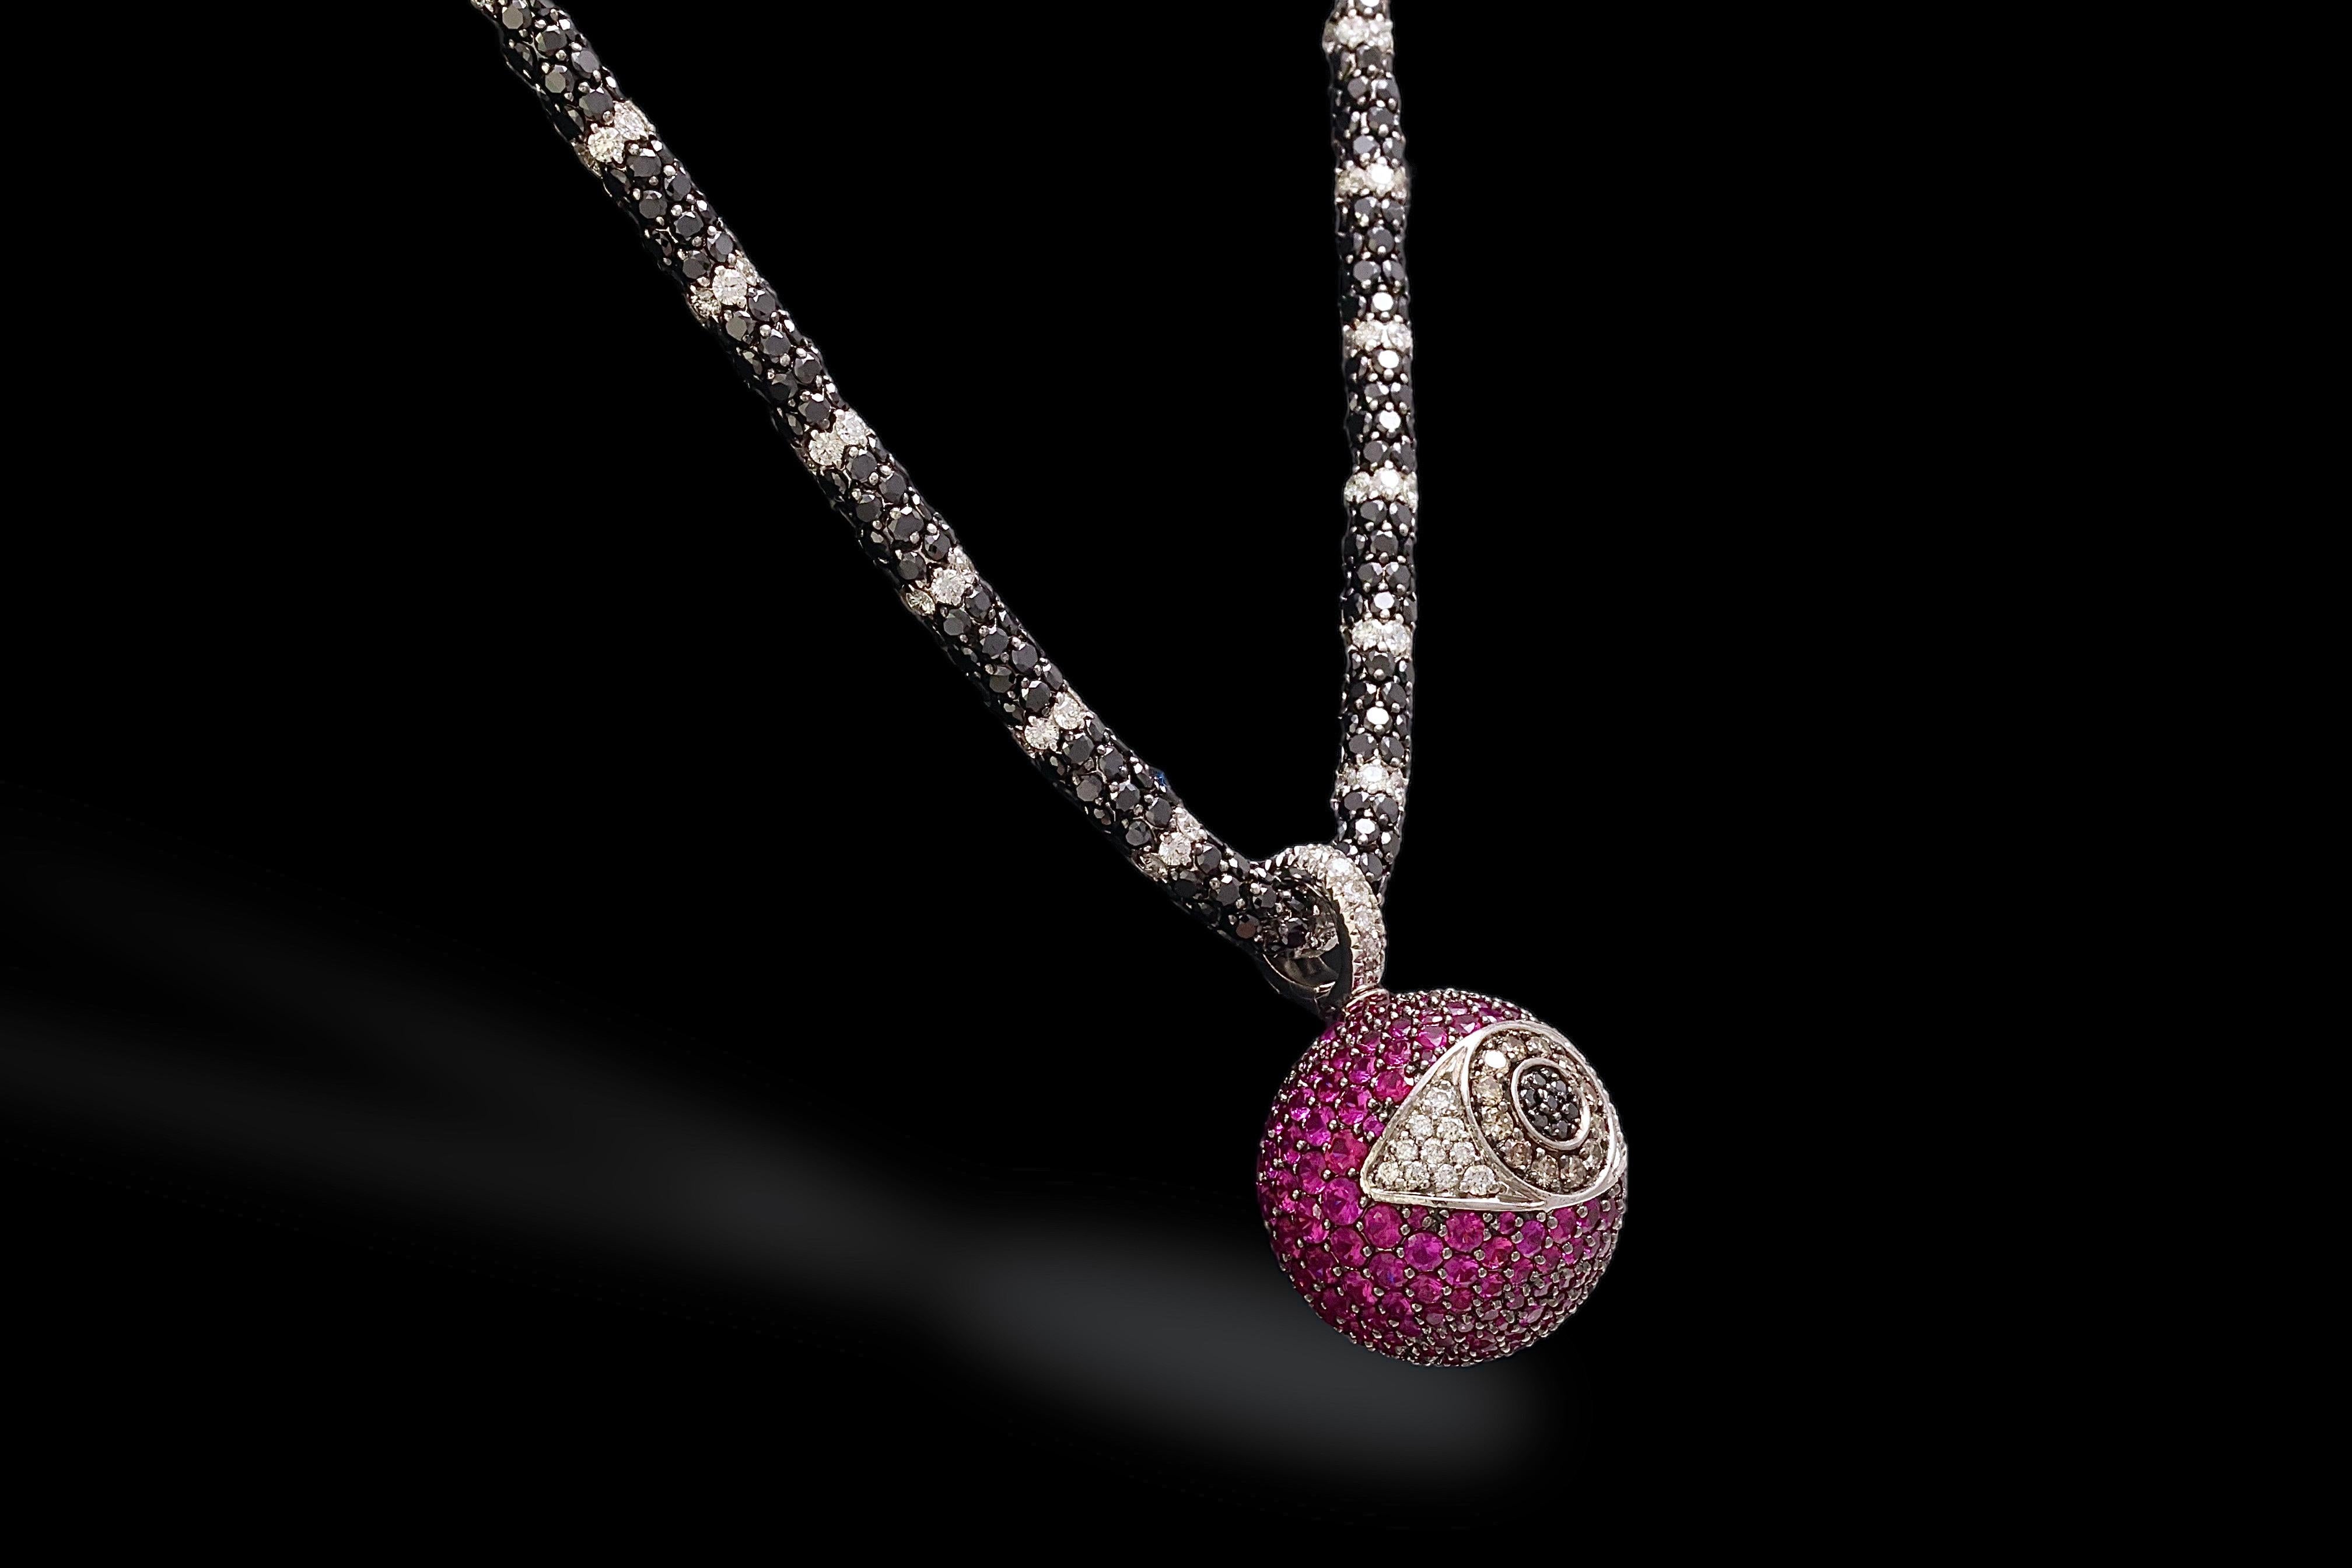 18 Kt Gold Necklace & Pendant With 30 ct. Black & White Diamonds & Rubies For Sale 2